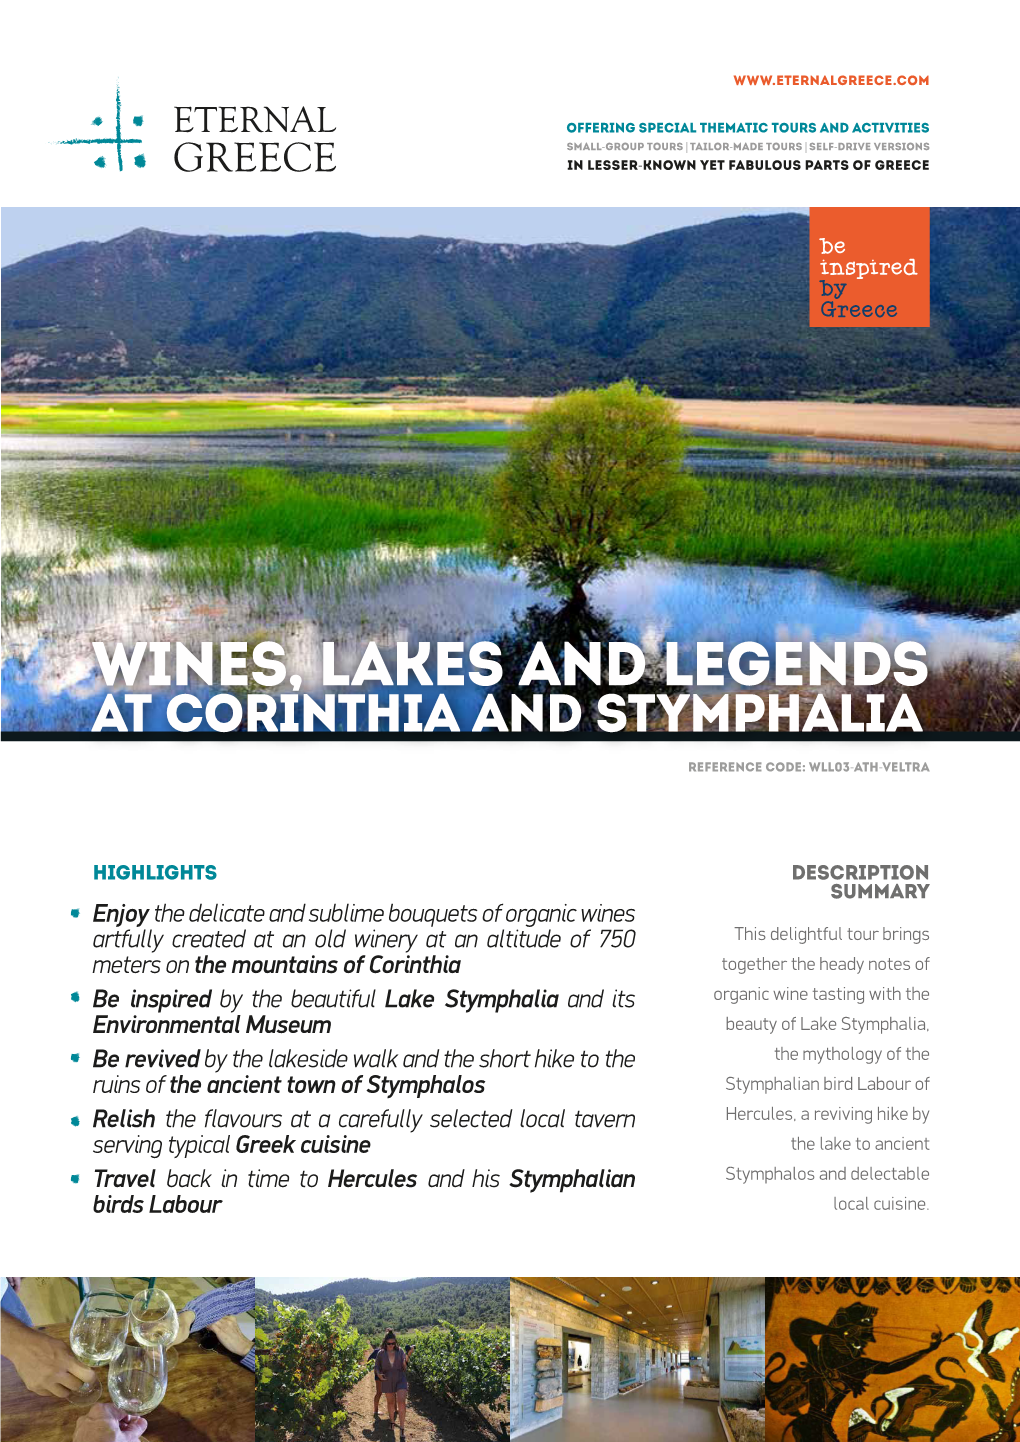 Wines, Lakes and Legends at Corinthia and Stymphalia